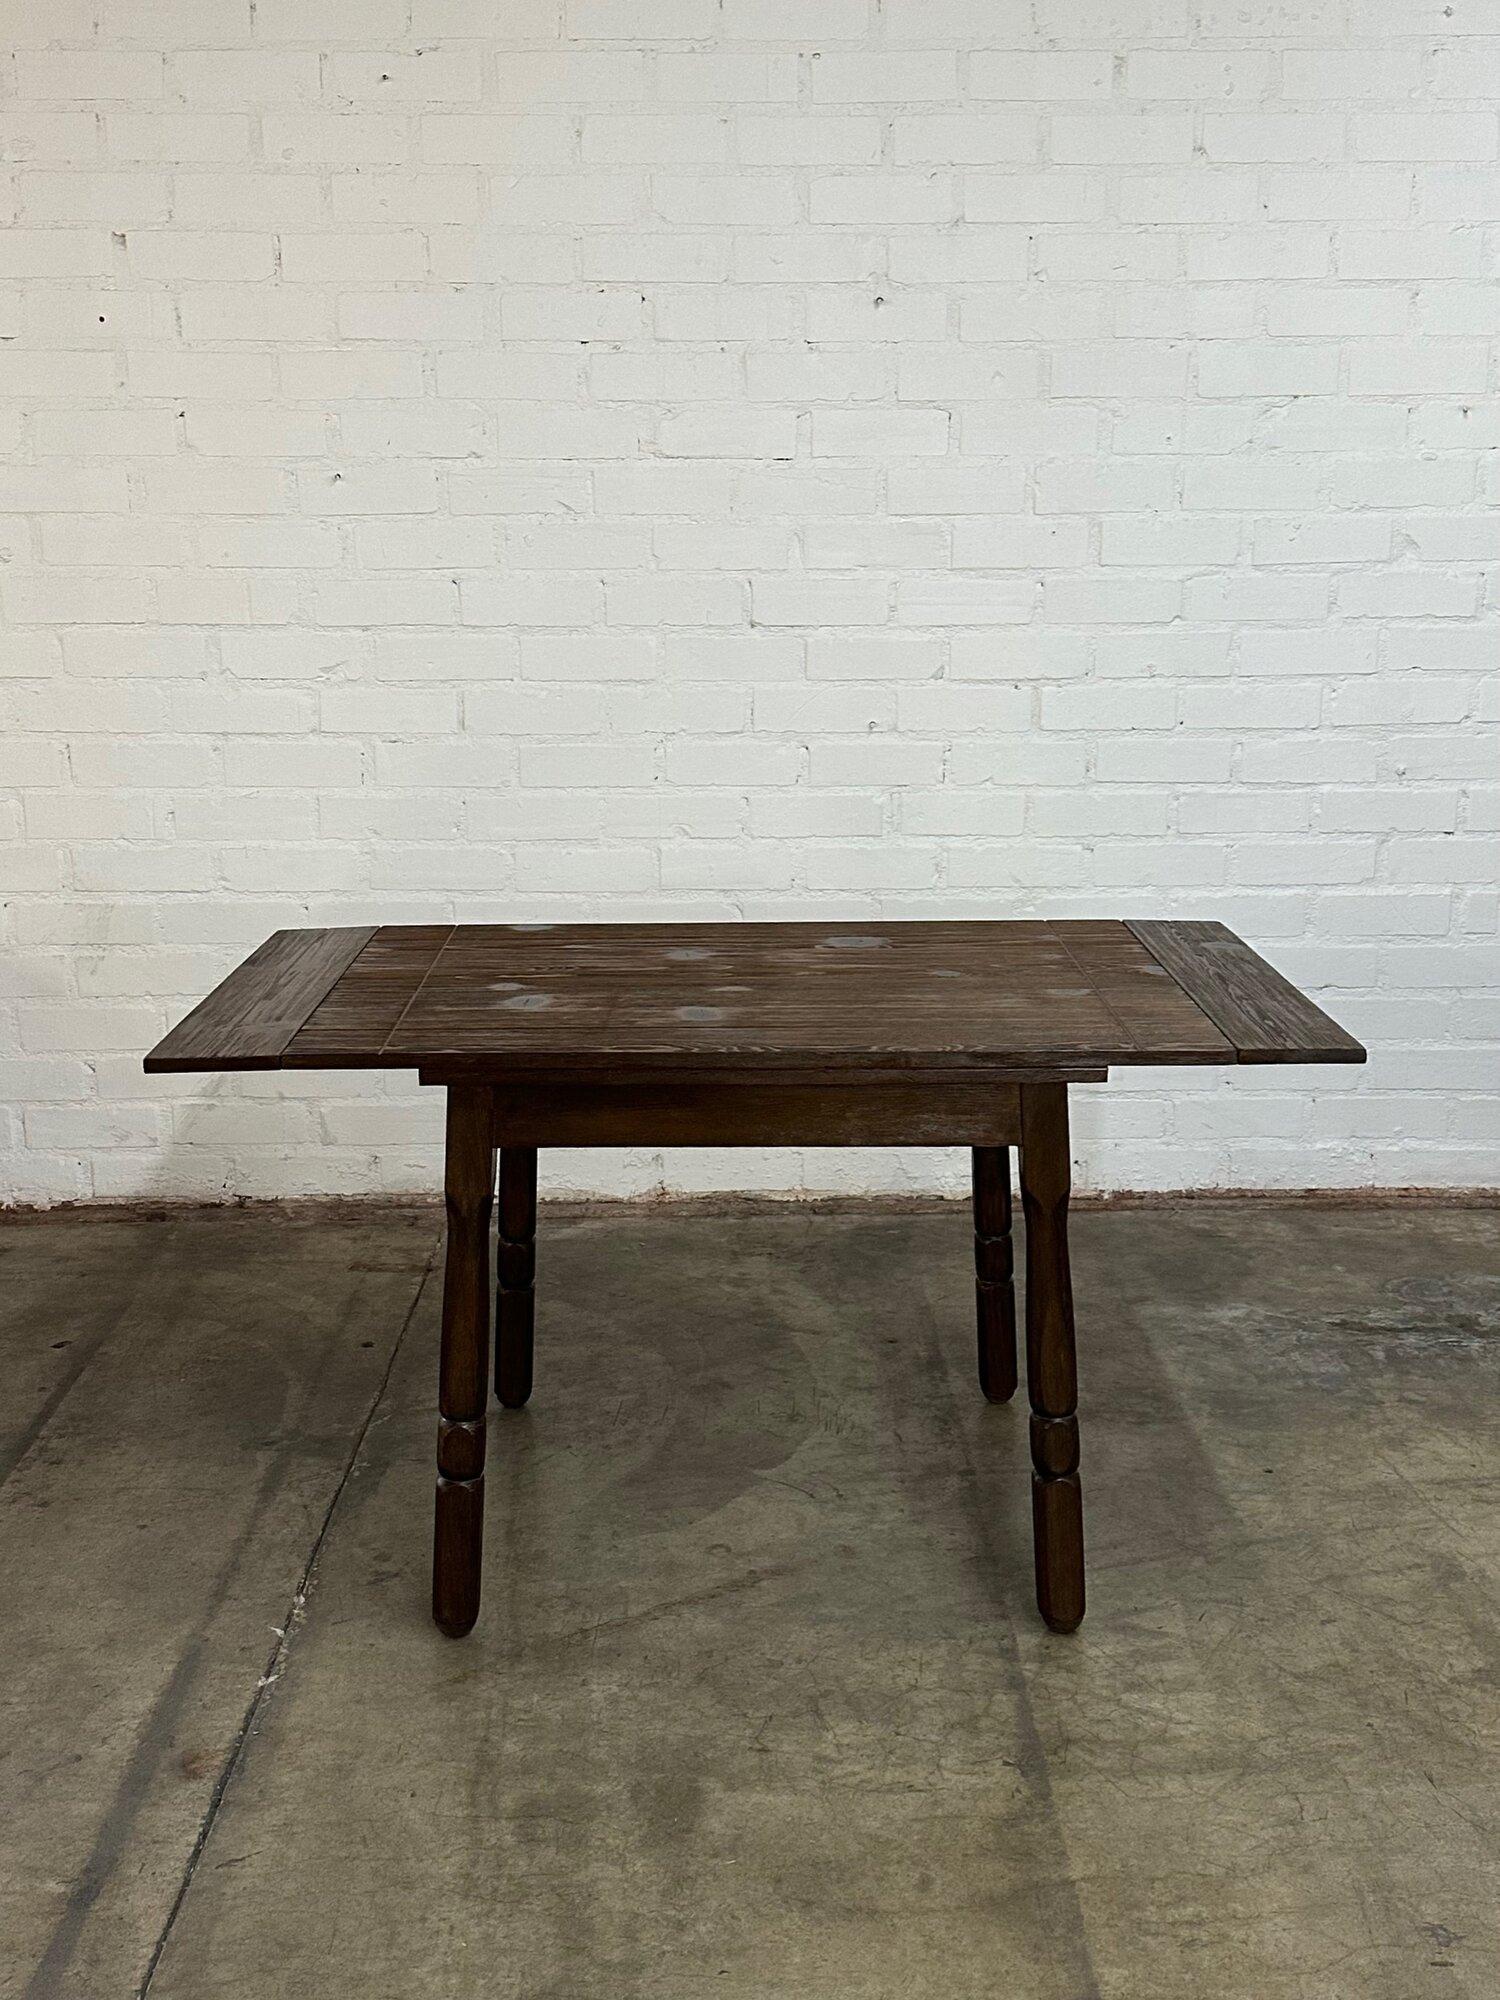 W56 W44 D30 H30 KC25

Structurally sound and sturdy aged pine dining table. Surface has been cleaned and refinished in a dark walnut. Table extensions easily fold down with a wooden rail underneath that slide forward and backwards.

